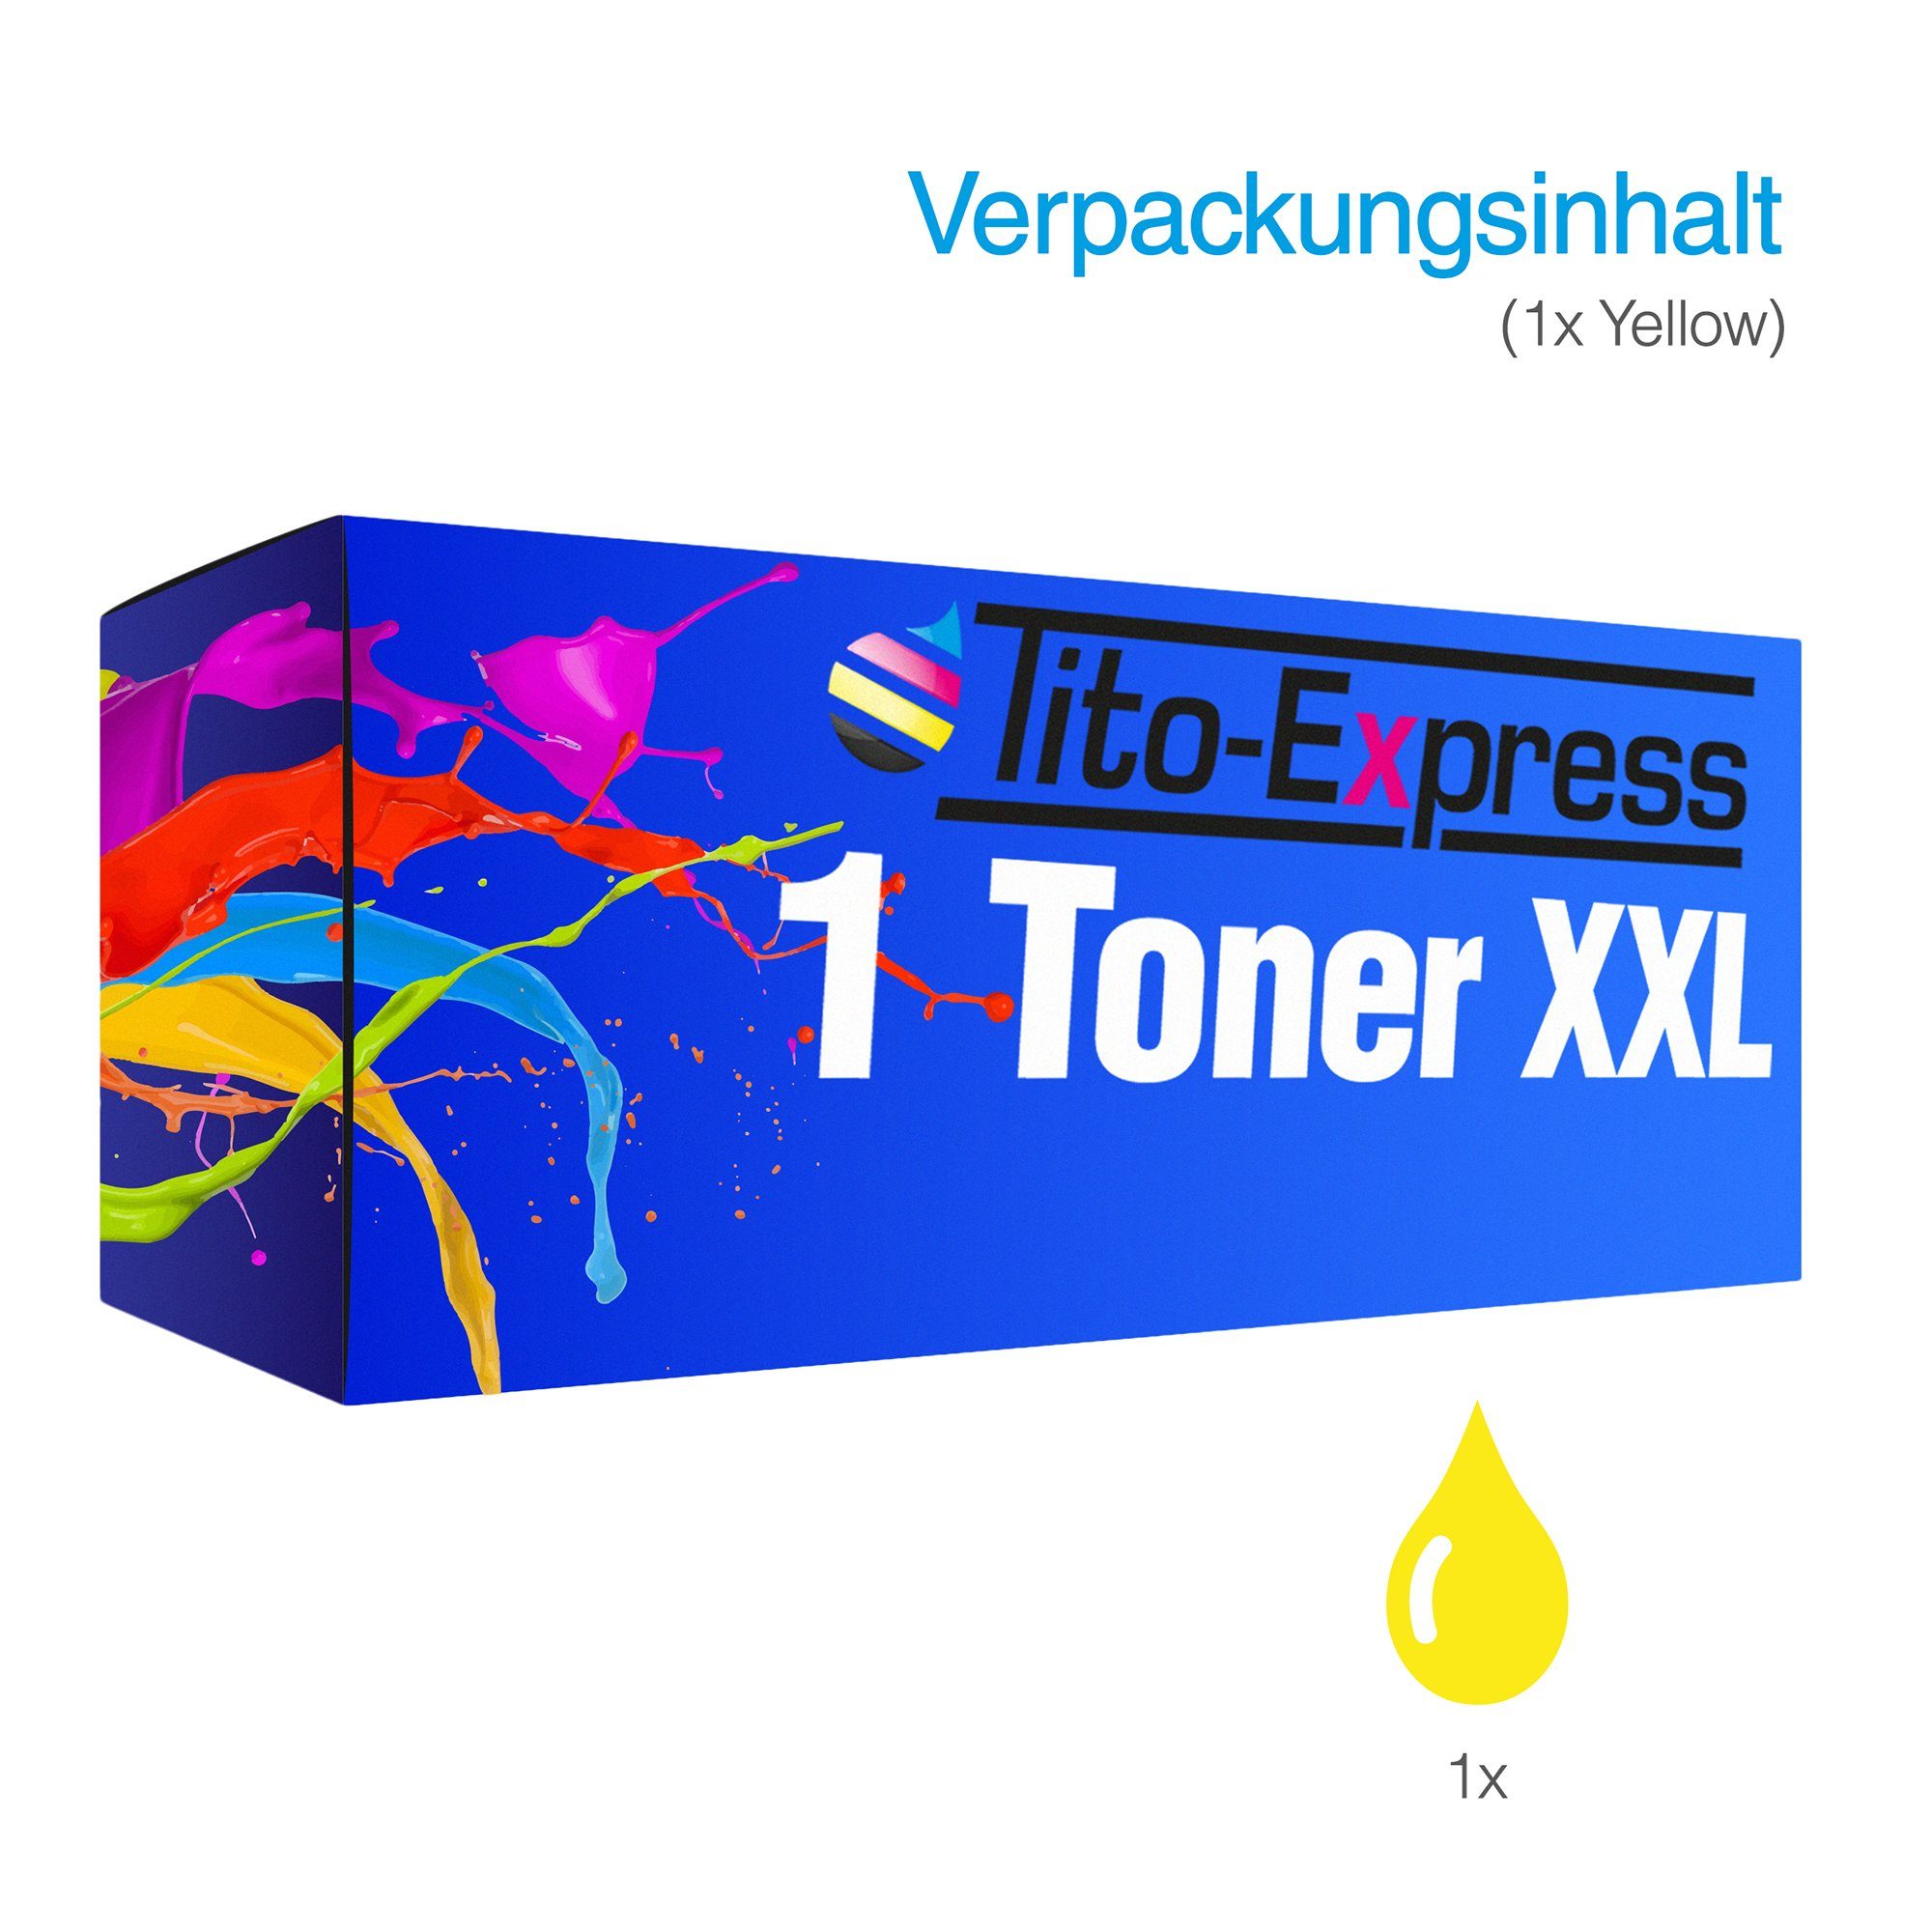 Tito-Express Tonerpatrone ersetzt Brother HL-4150CDN für TN-325, DCP-9270CDN 320 DCP-9055CDN DR320 (1x Brother HL-4570CDW HL-4140CN Trommel), Brother DR-320 DR